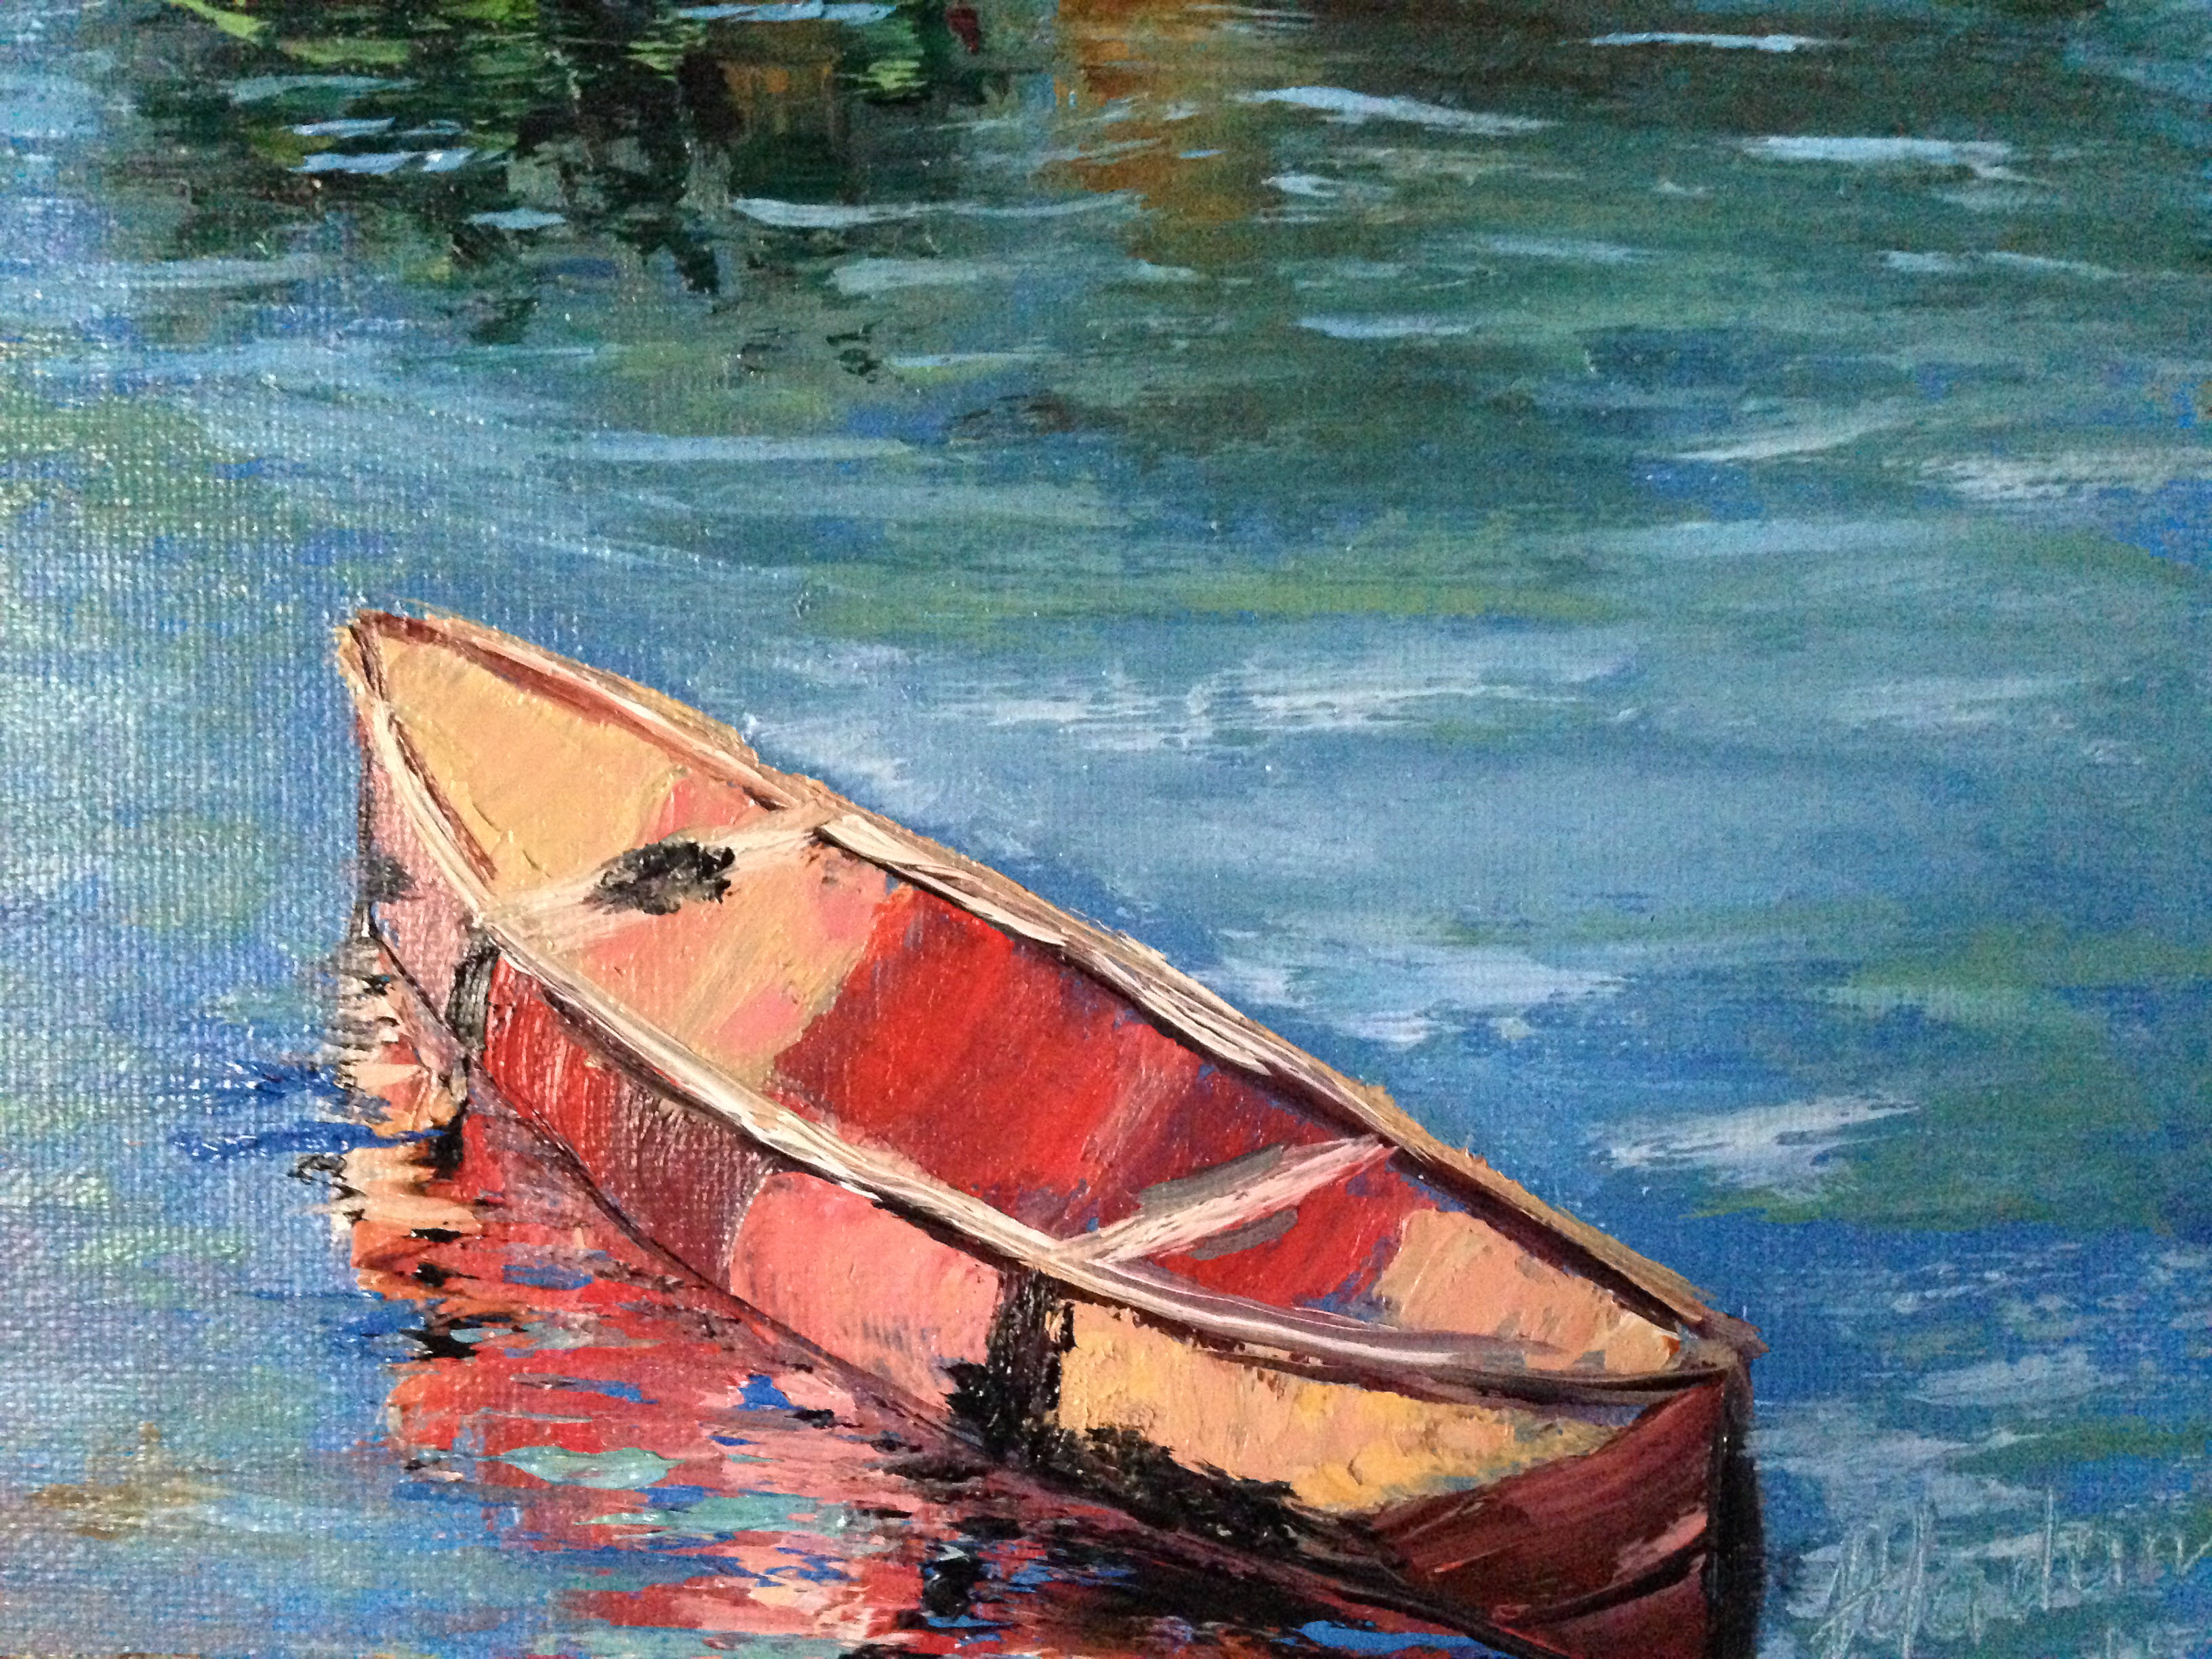 Ruby lake canoeing | I Learn Painting